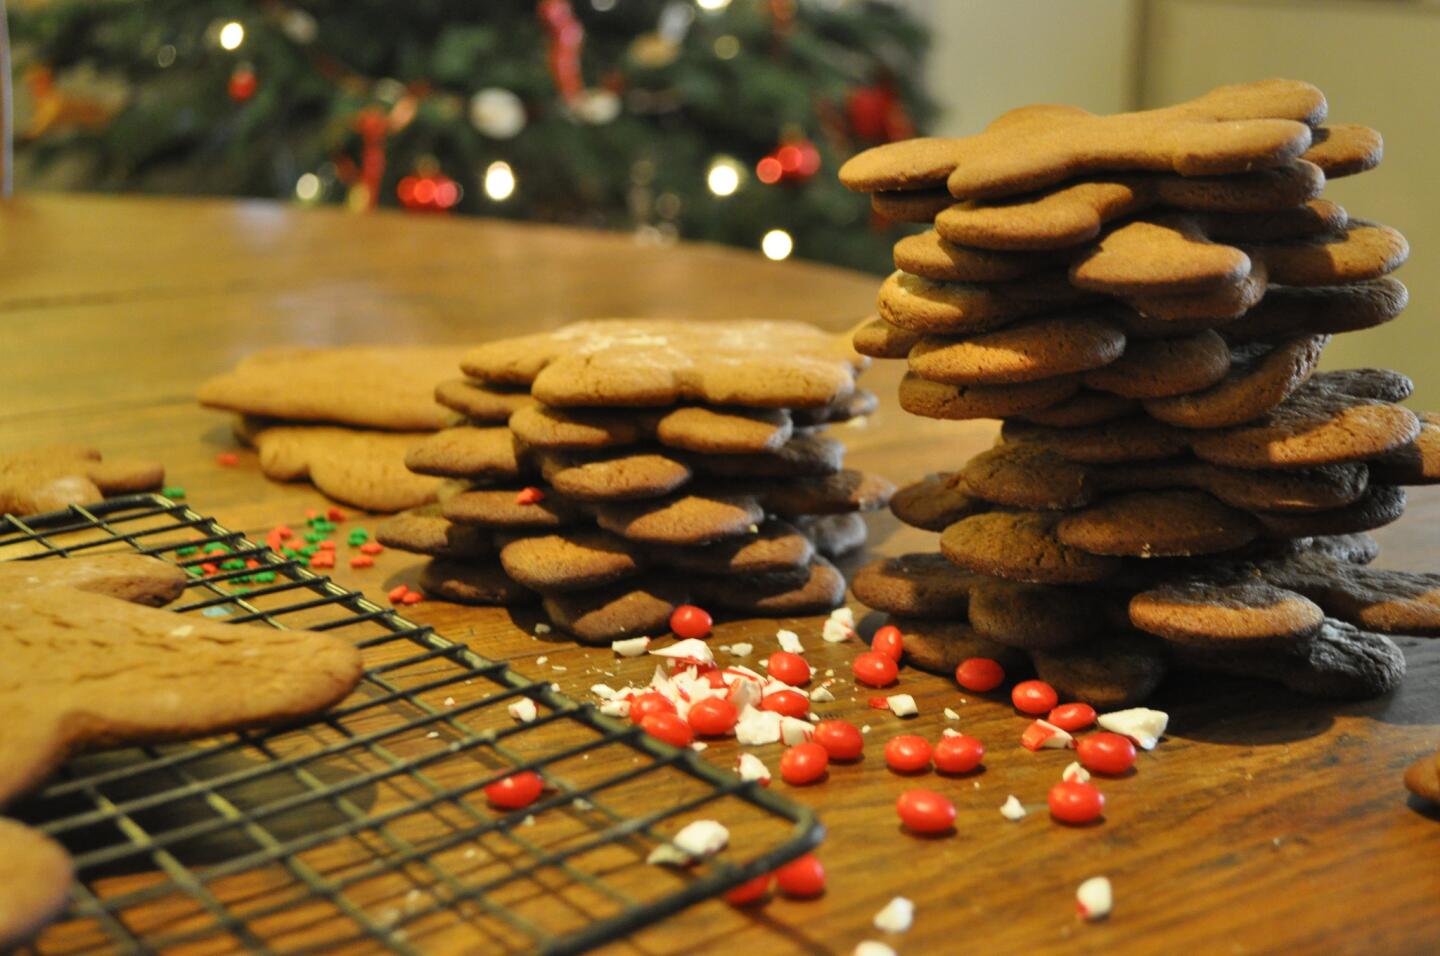 Gingerbread cookies waiting for decoration.